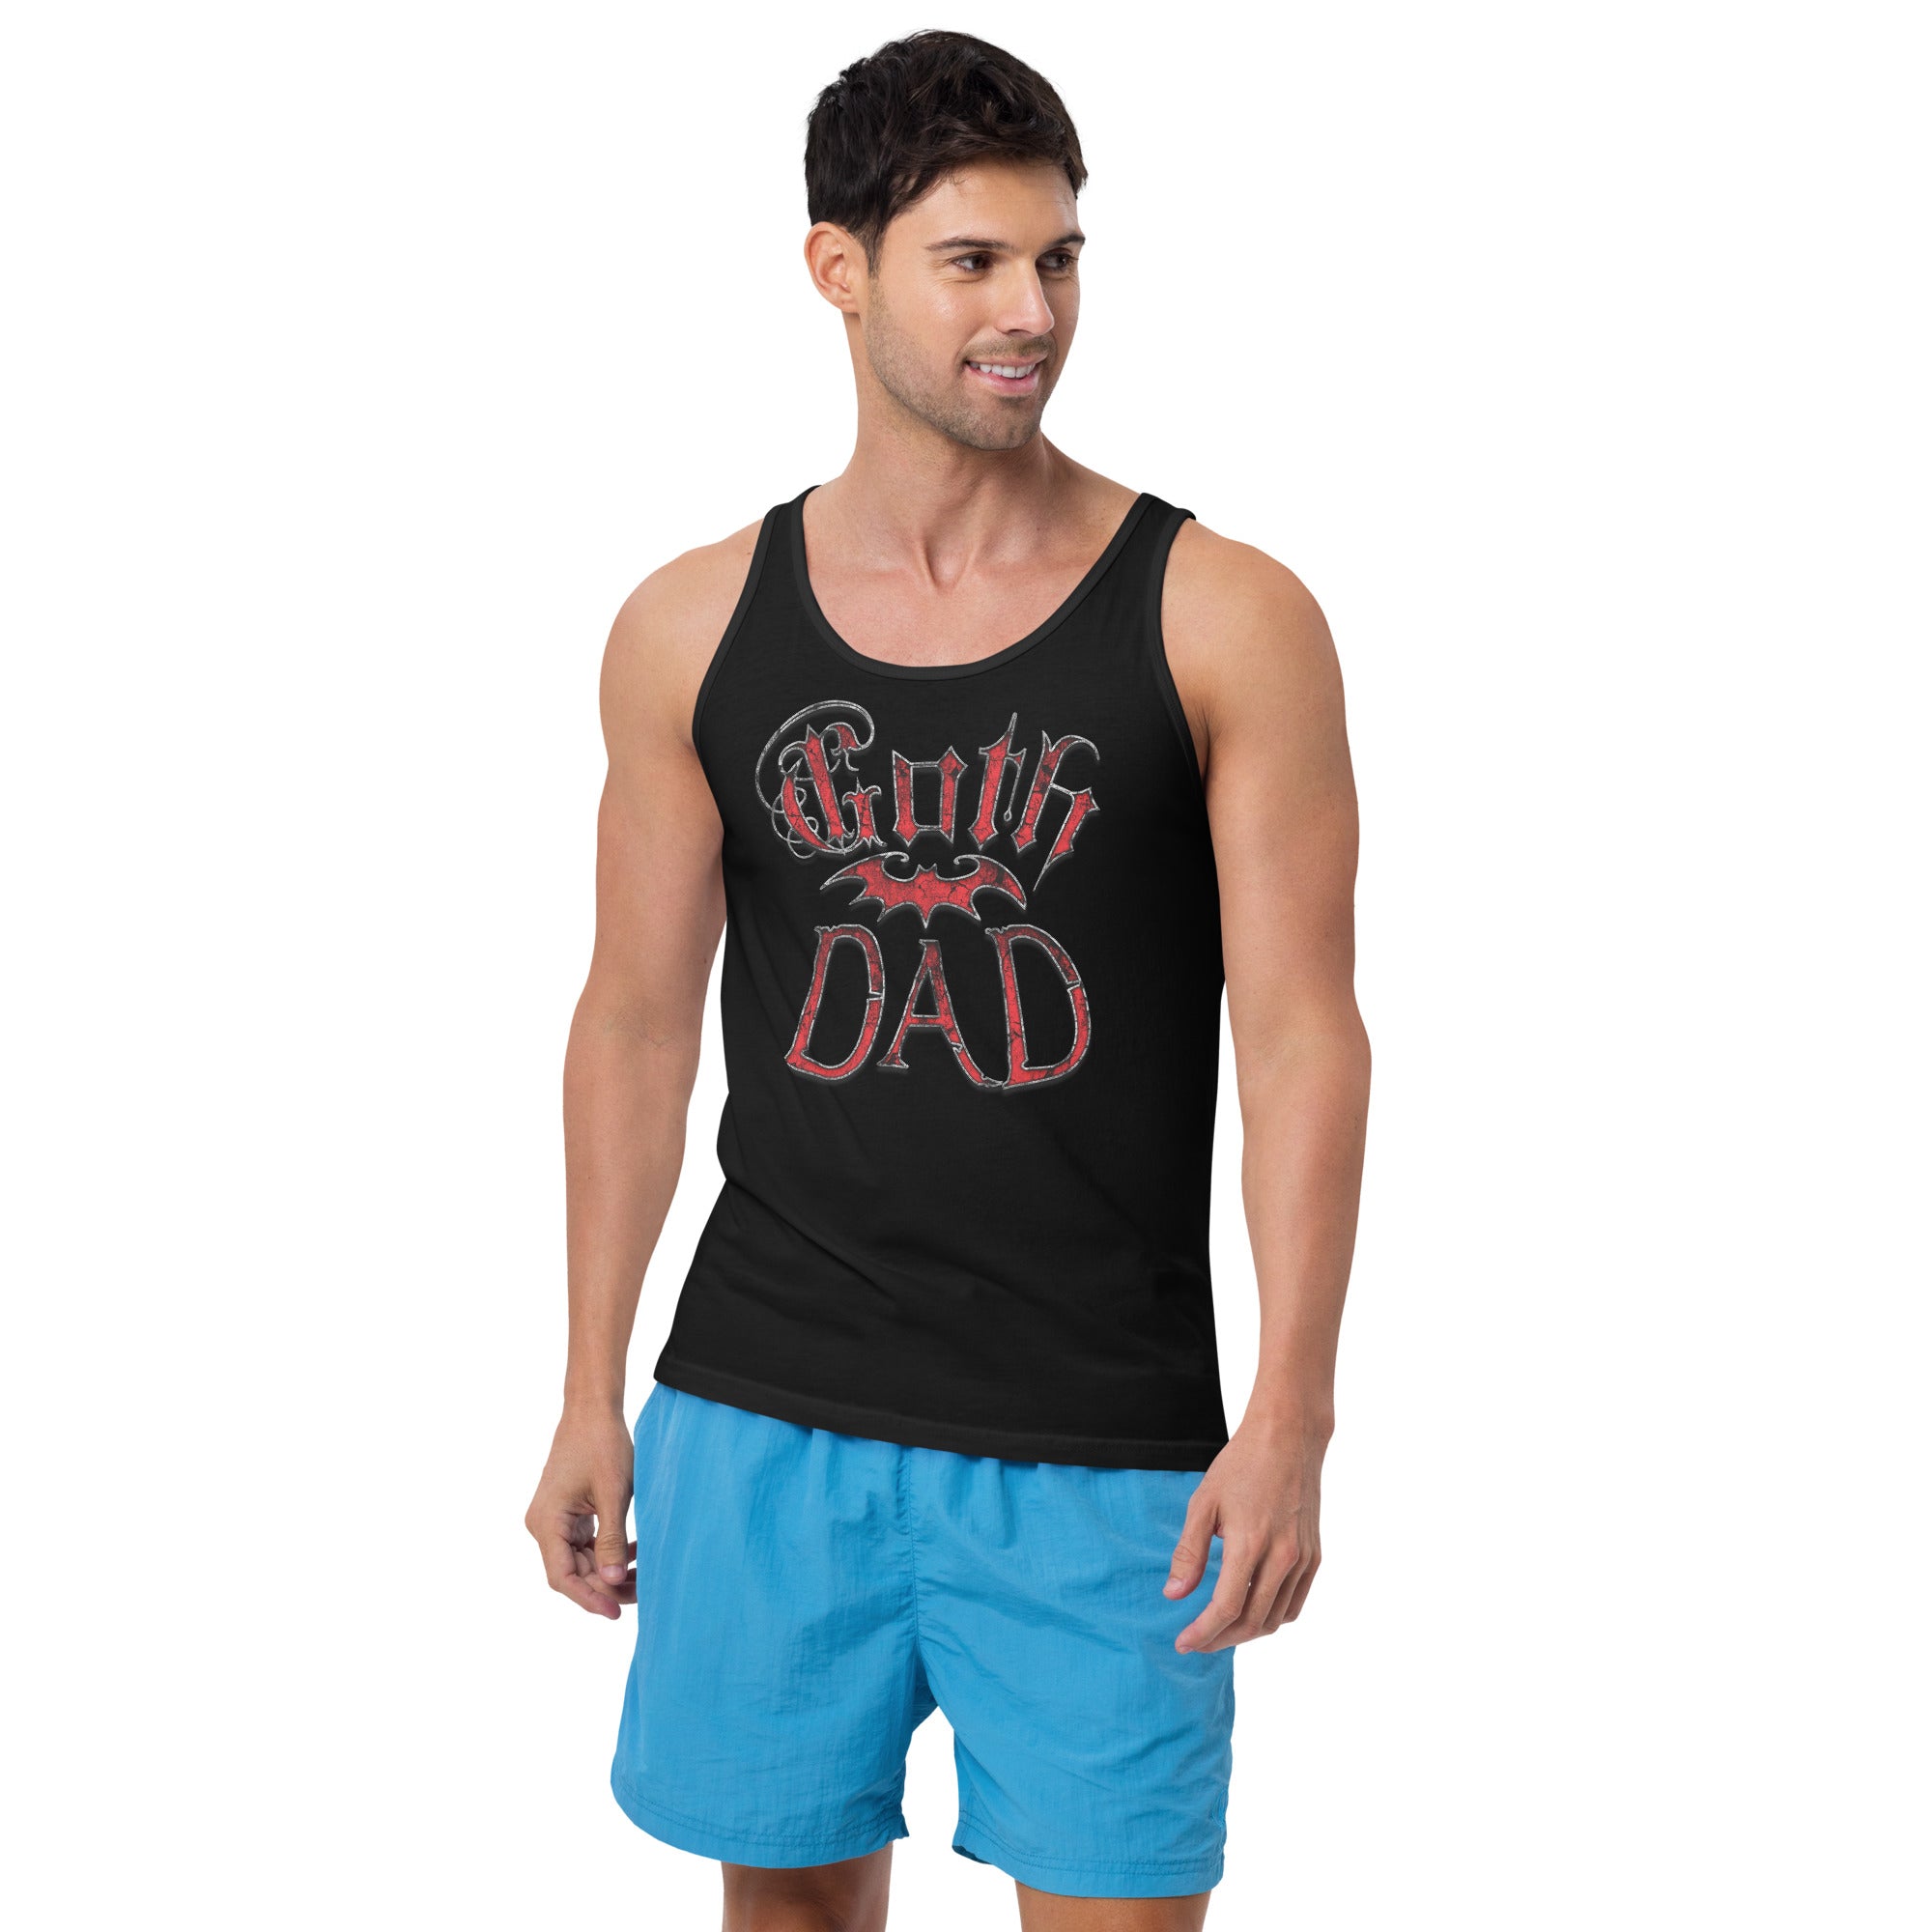 Red Goth Dad with Bat Father's Day Gift Men's Tank Top Shirt